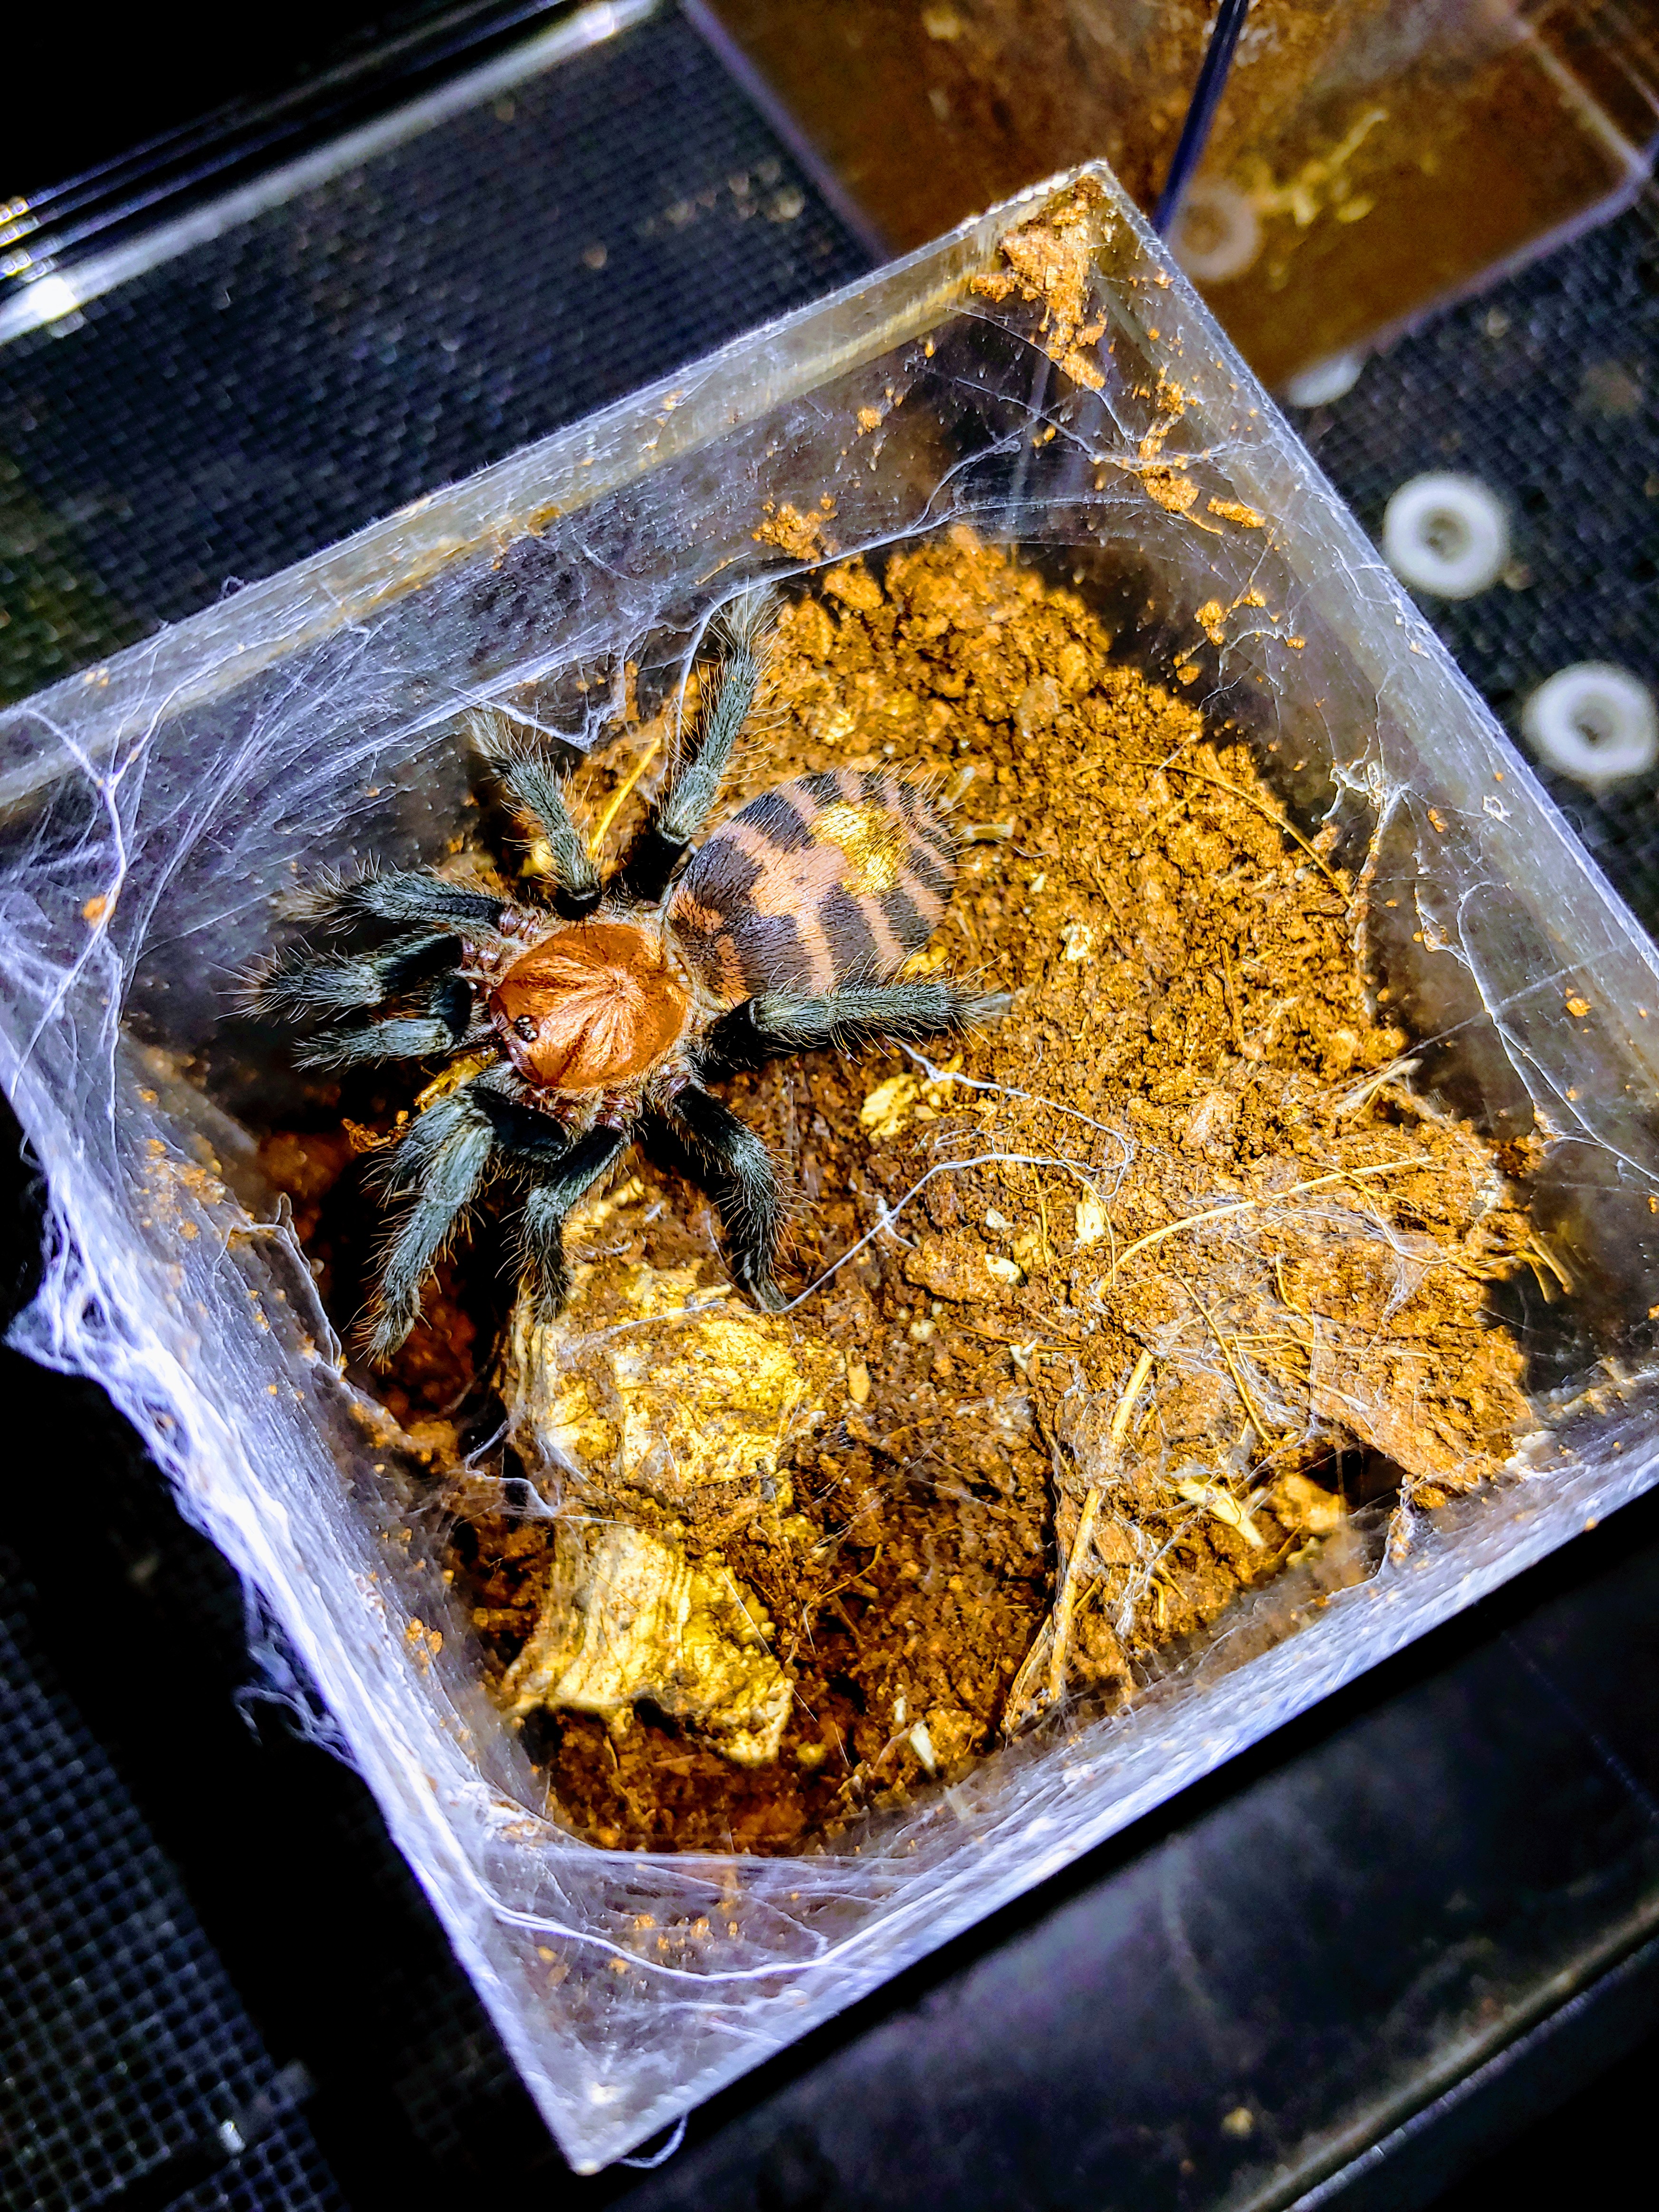 Time for a rehouse?